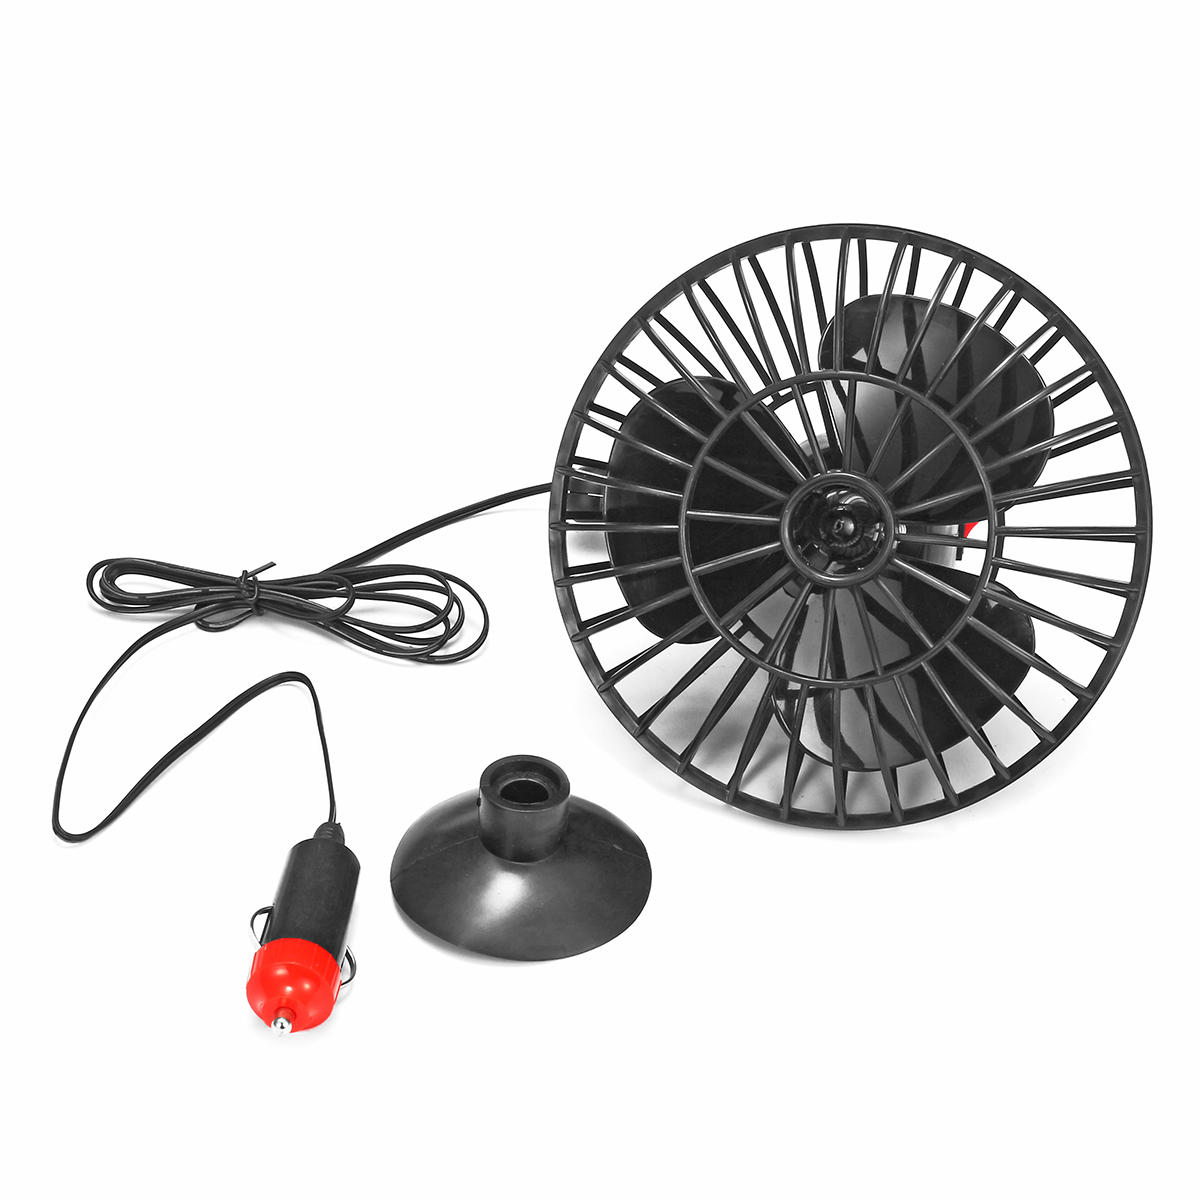 Portable 12v Dc Electric Oscillating Car Cooler Fan Clip Switch